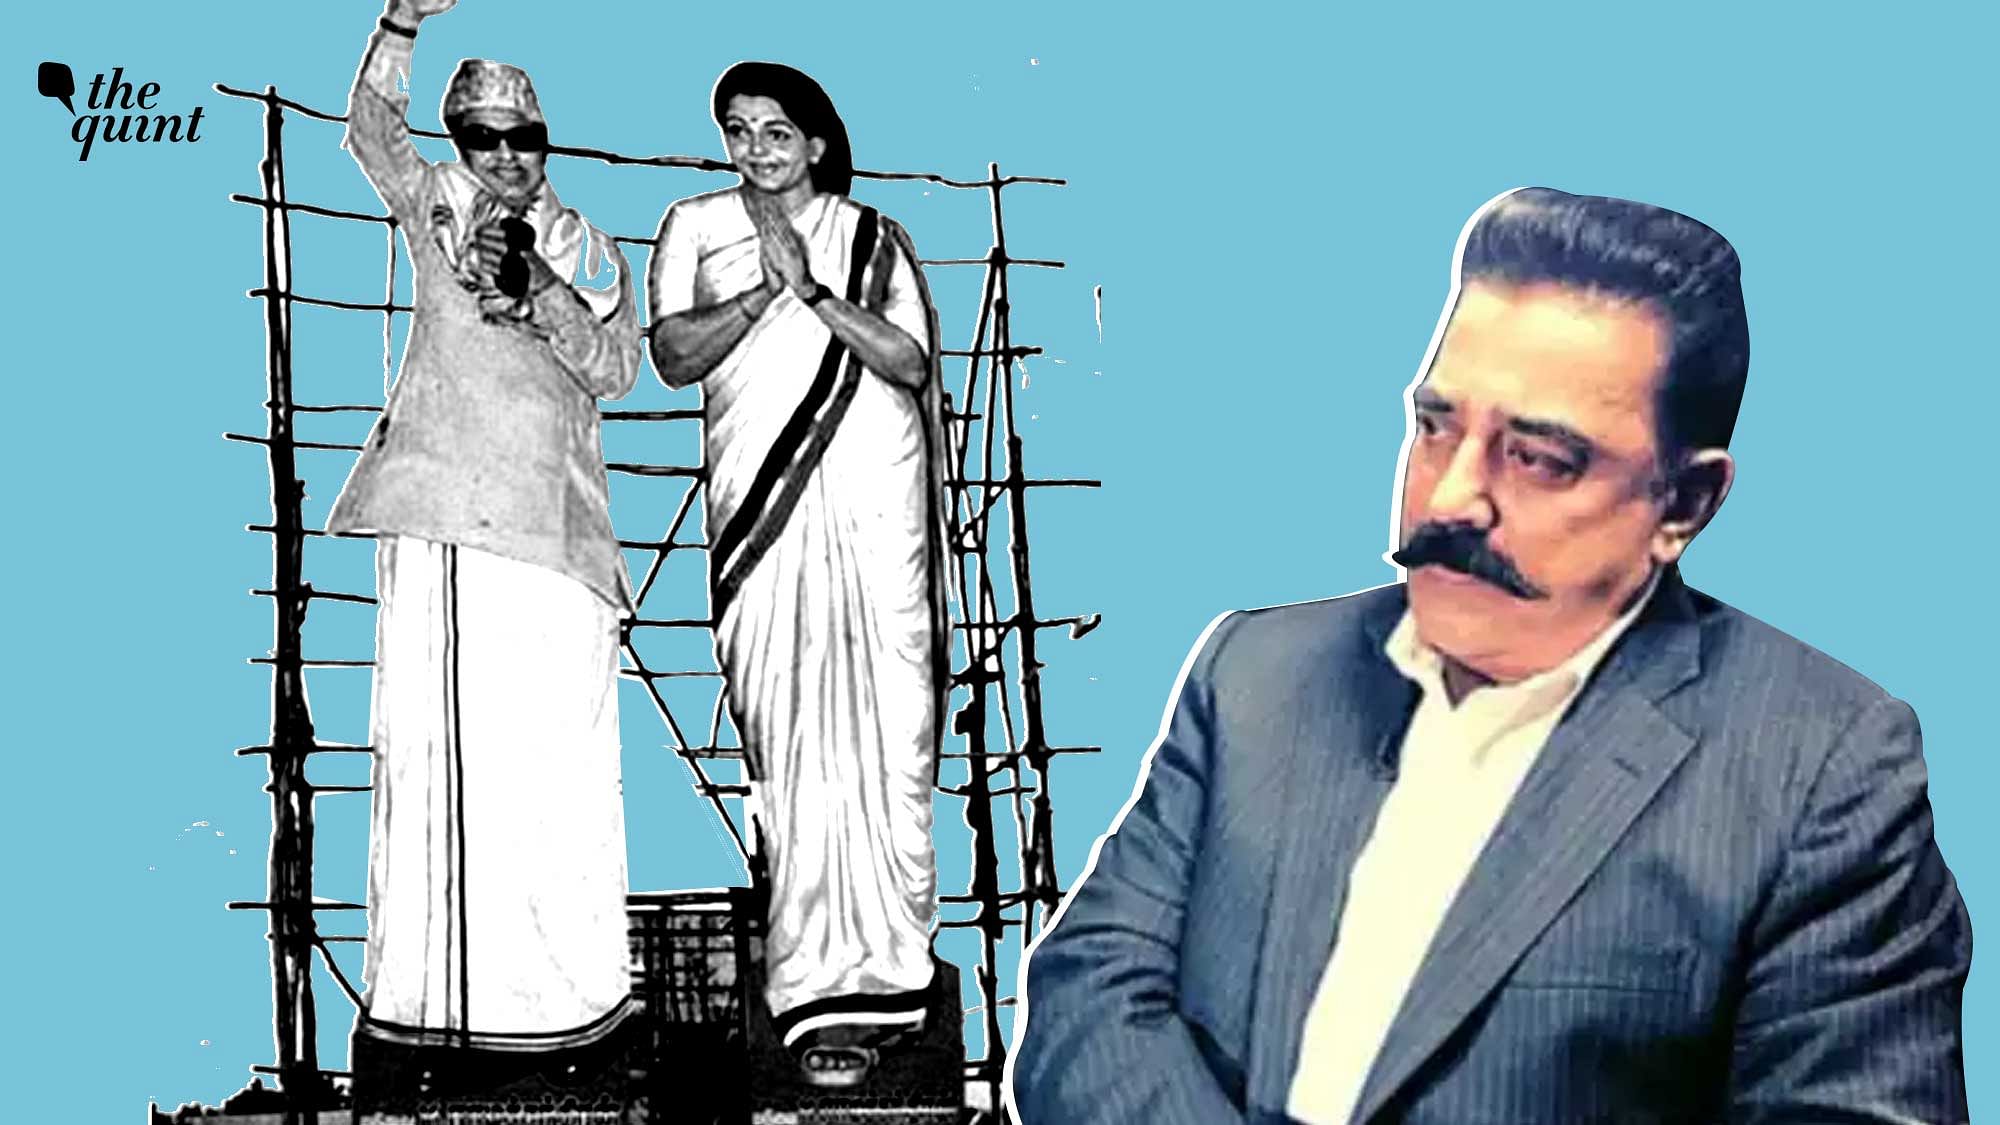 Unlike MGR who projected a political outlook even in his films, Haasan’s ambiguous political stance in films, cast a shadow on his political life.